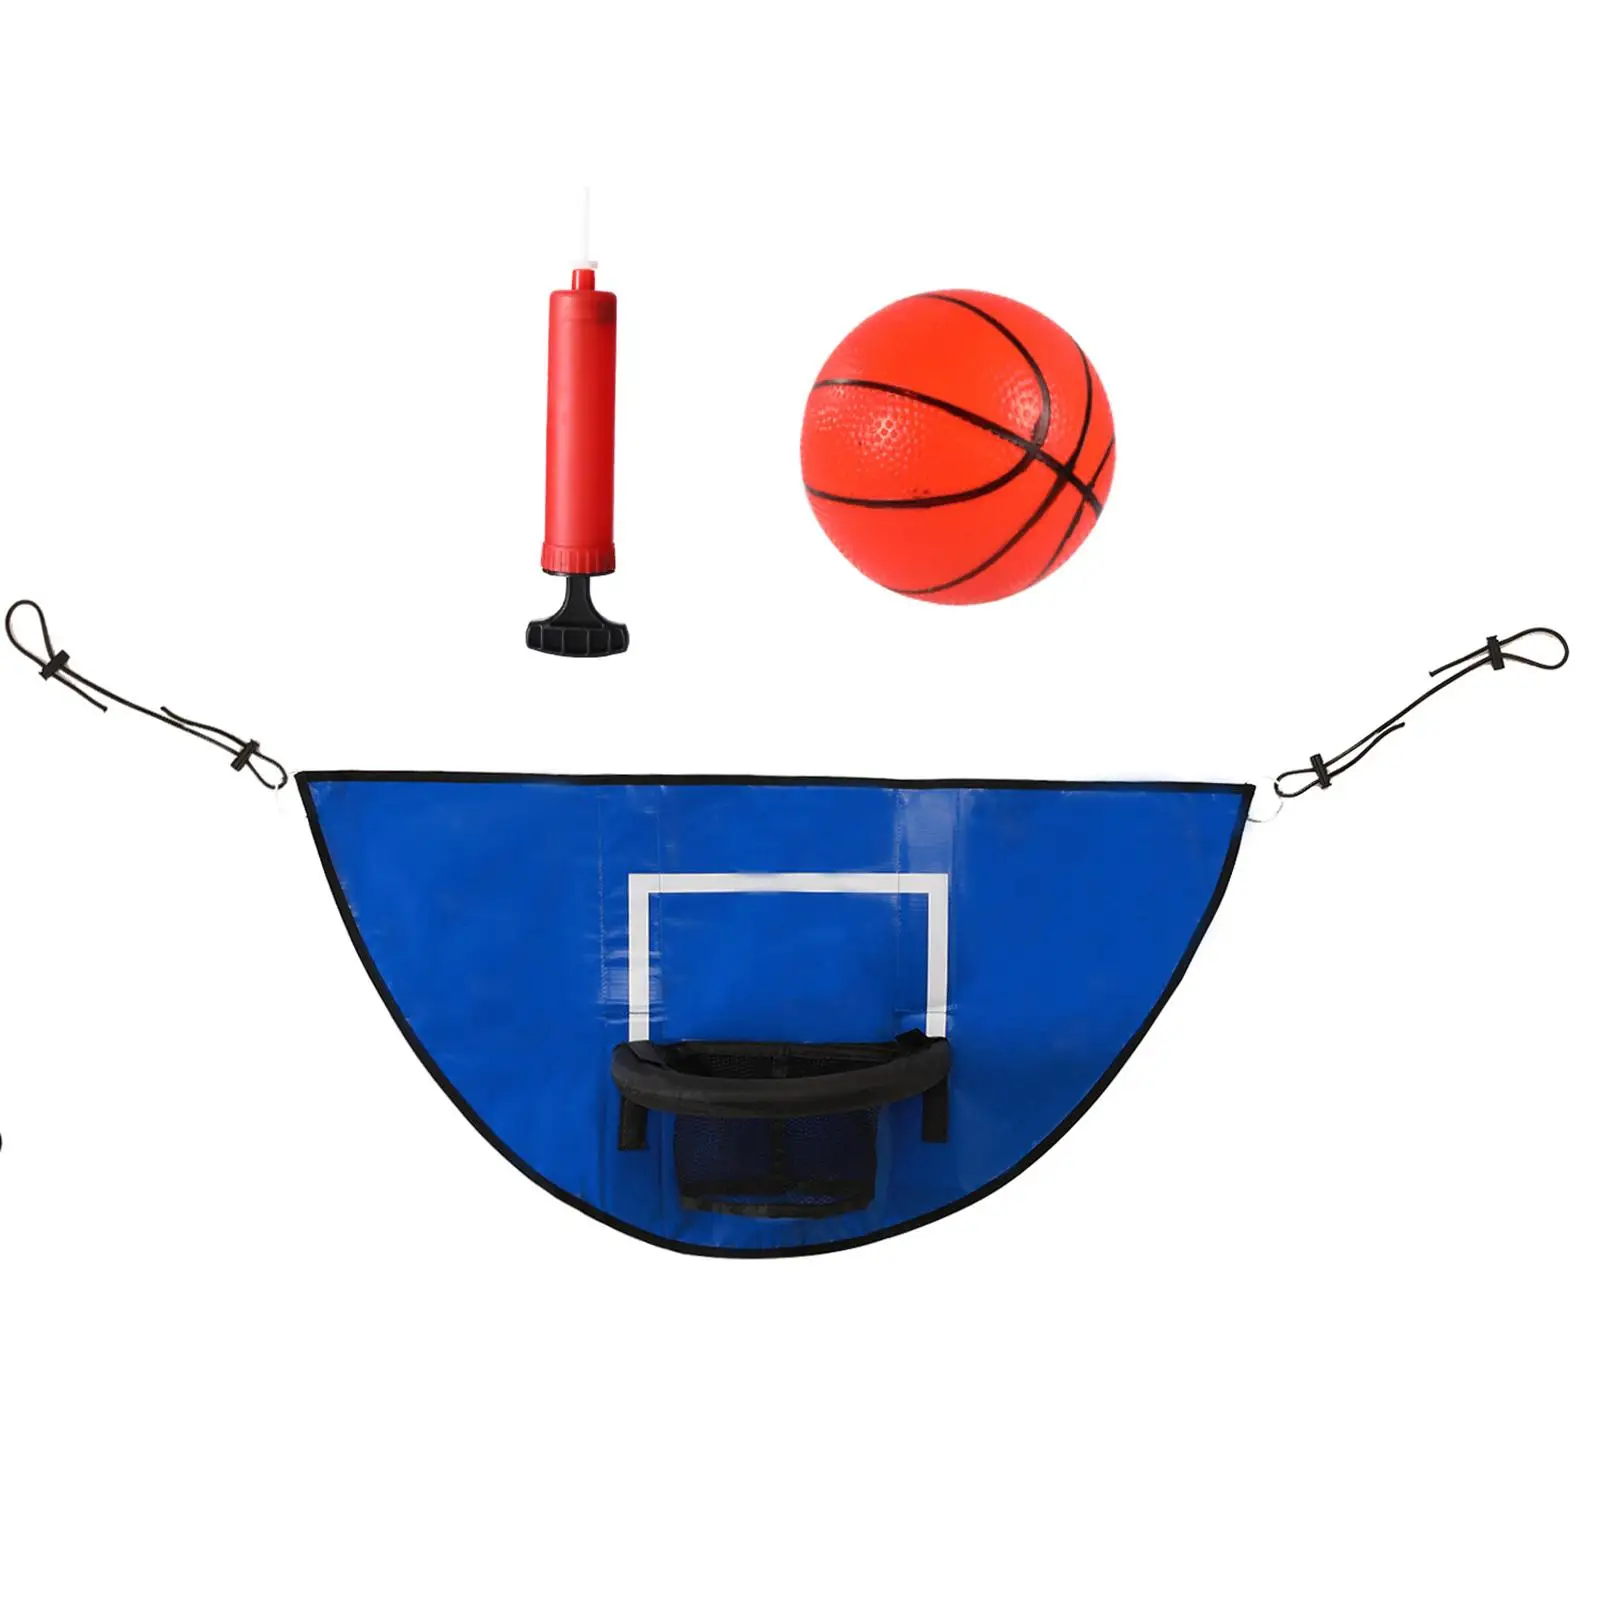 Mini Basketball Hoop for Trampoline Sturdy for Dunk with Pump and Mini Ball